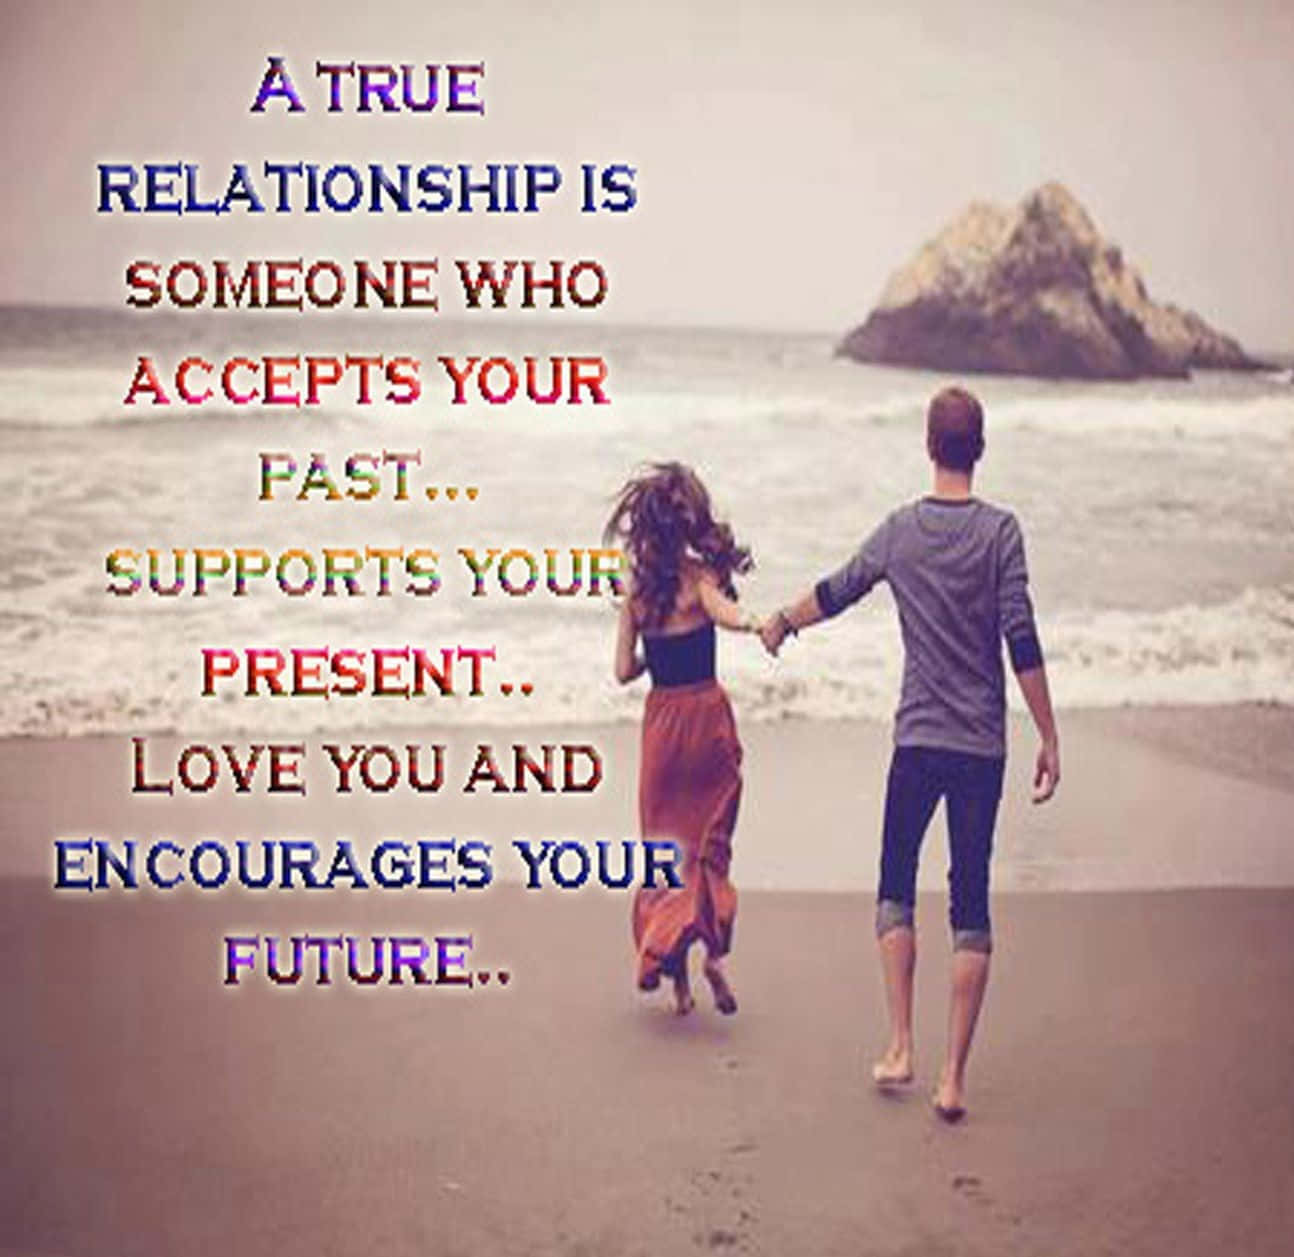 A True Relationship Is Someone Who Accepts Your Fast Presents Your Present Encourages Your Future